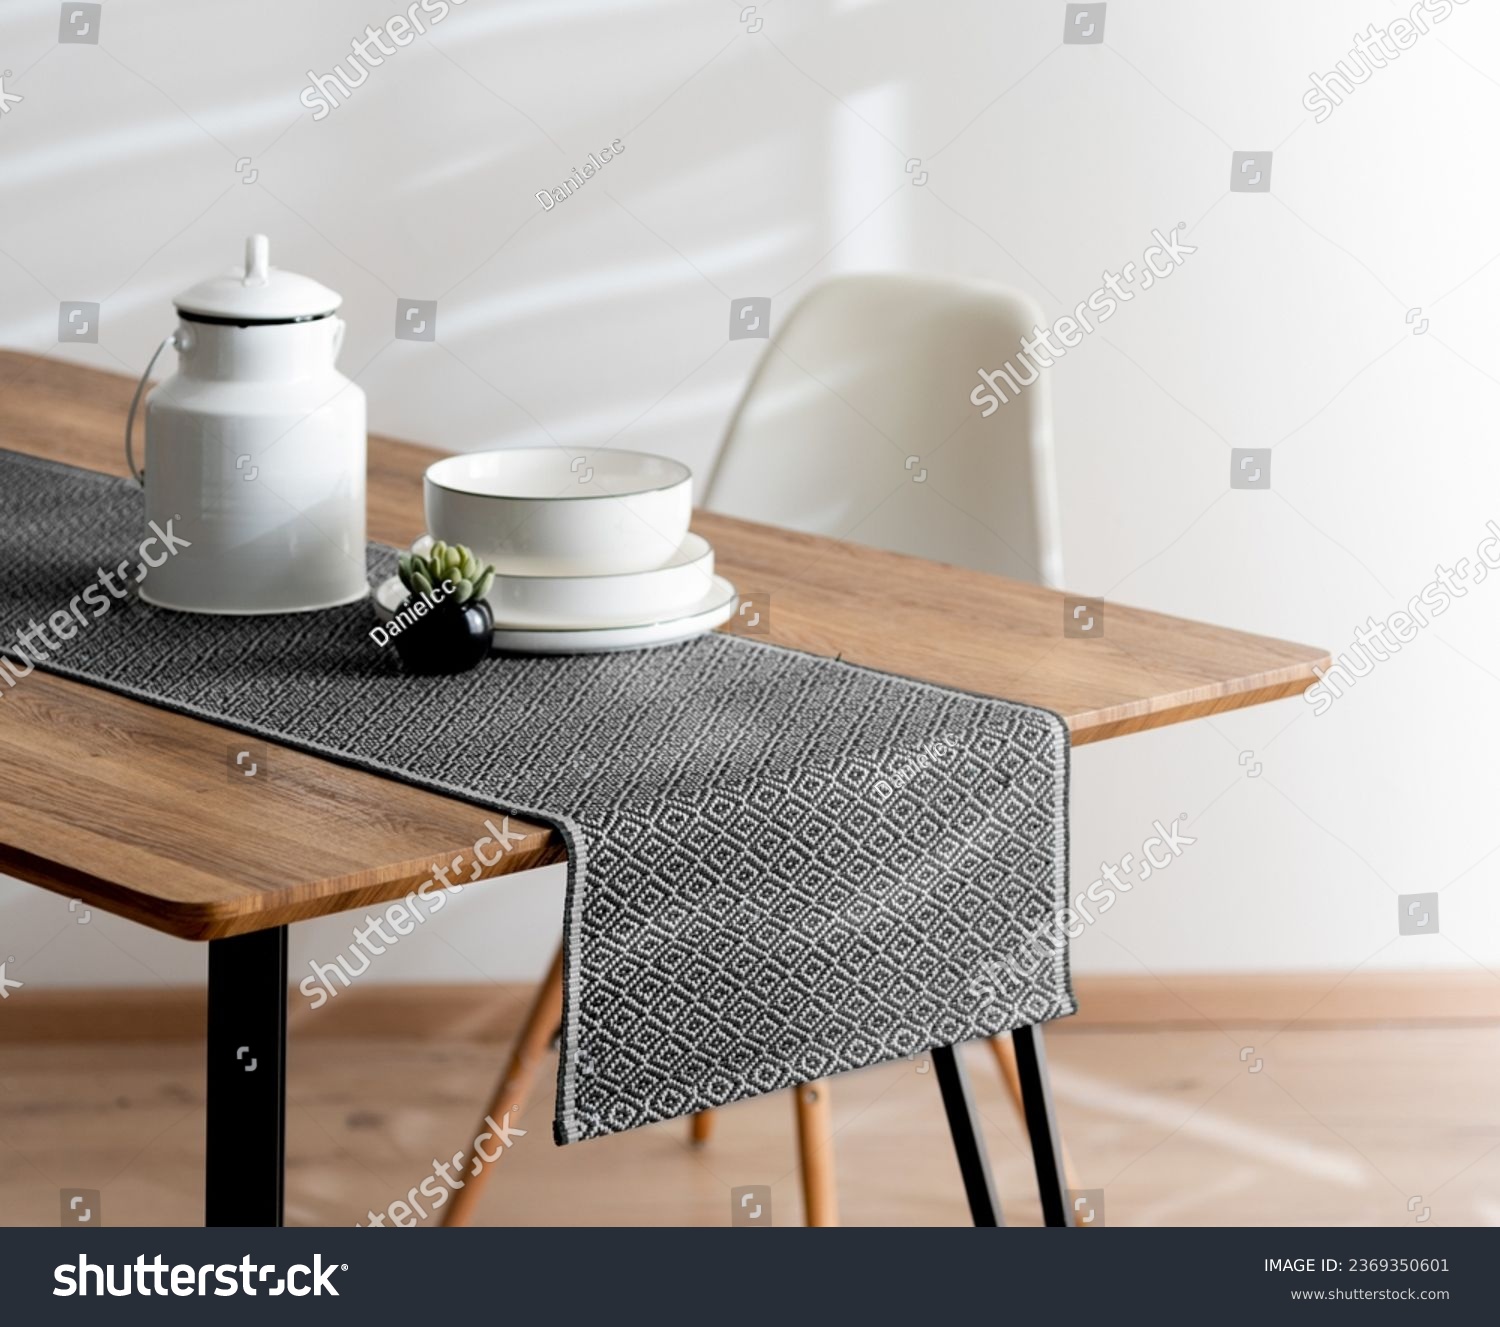 Modern Dining Room Featuring a Wooden Dining Table Adorned with a Grey Casual Linen Textured Table Runner, Teapot, and White Plates beside a White Plastic Dining Chairs, White Wall, Close Up. #2369350601